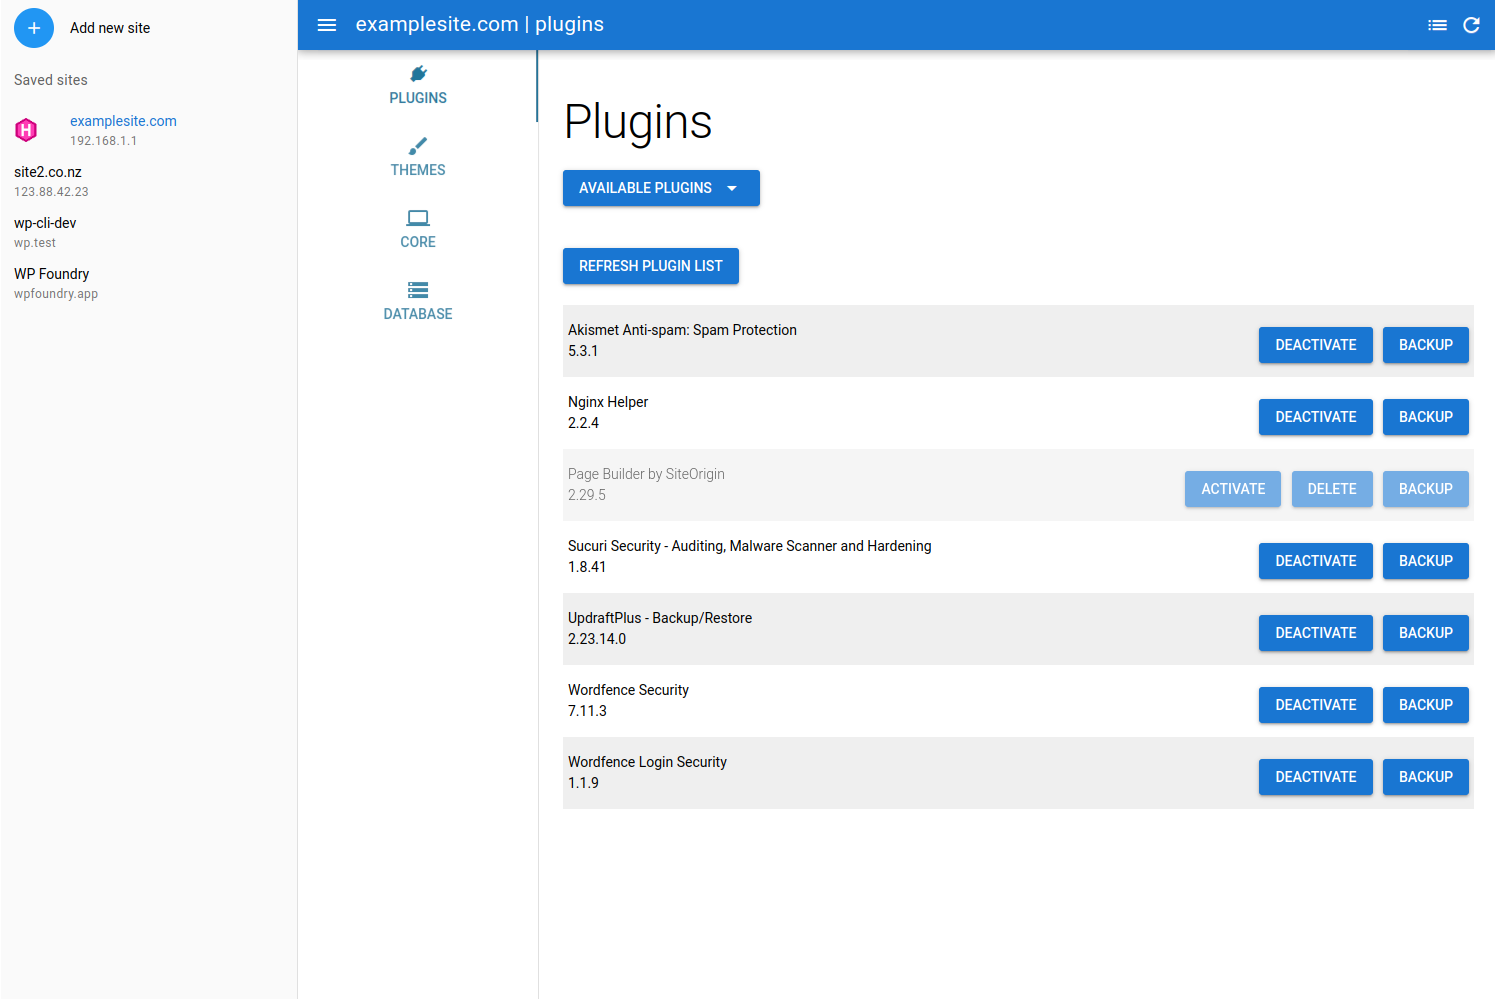 WP Foundry App Plugins page